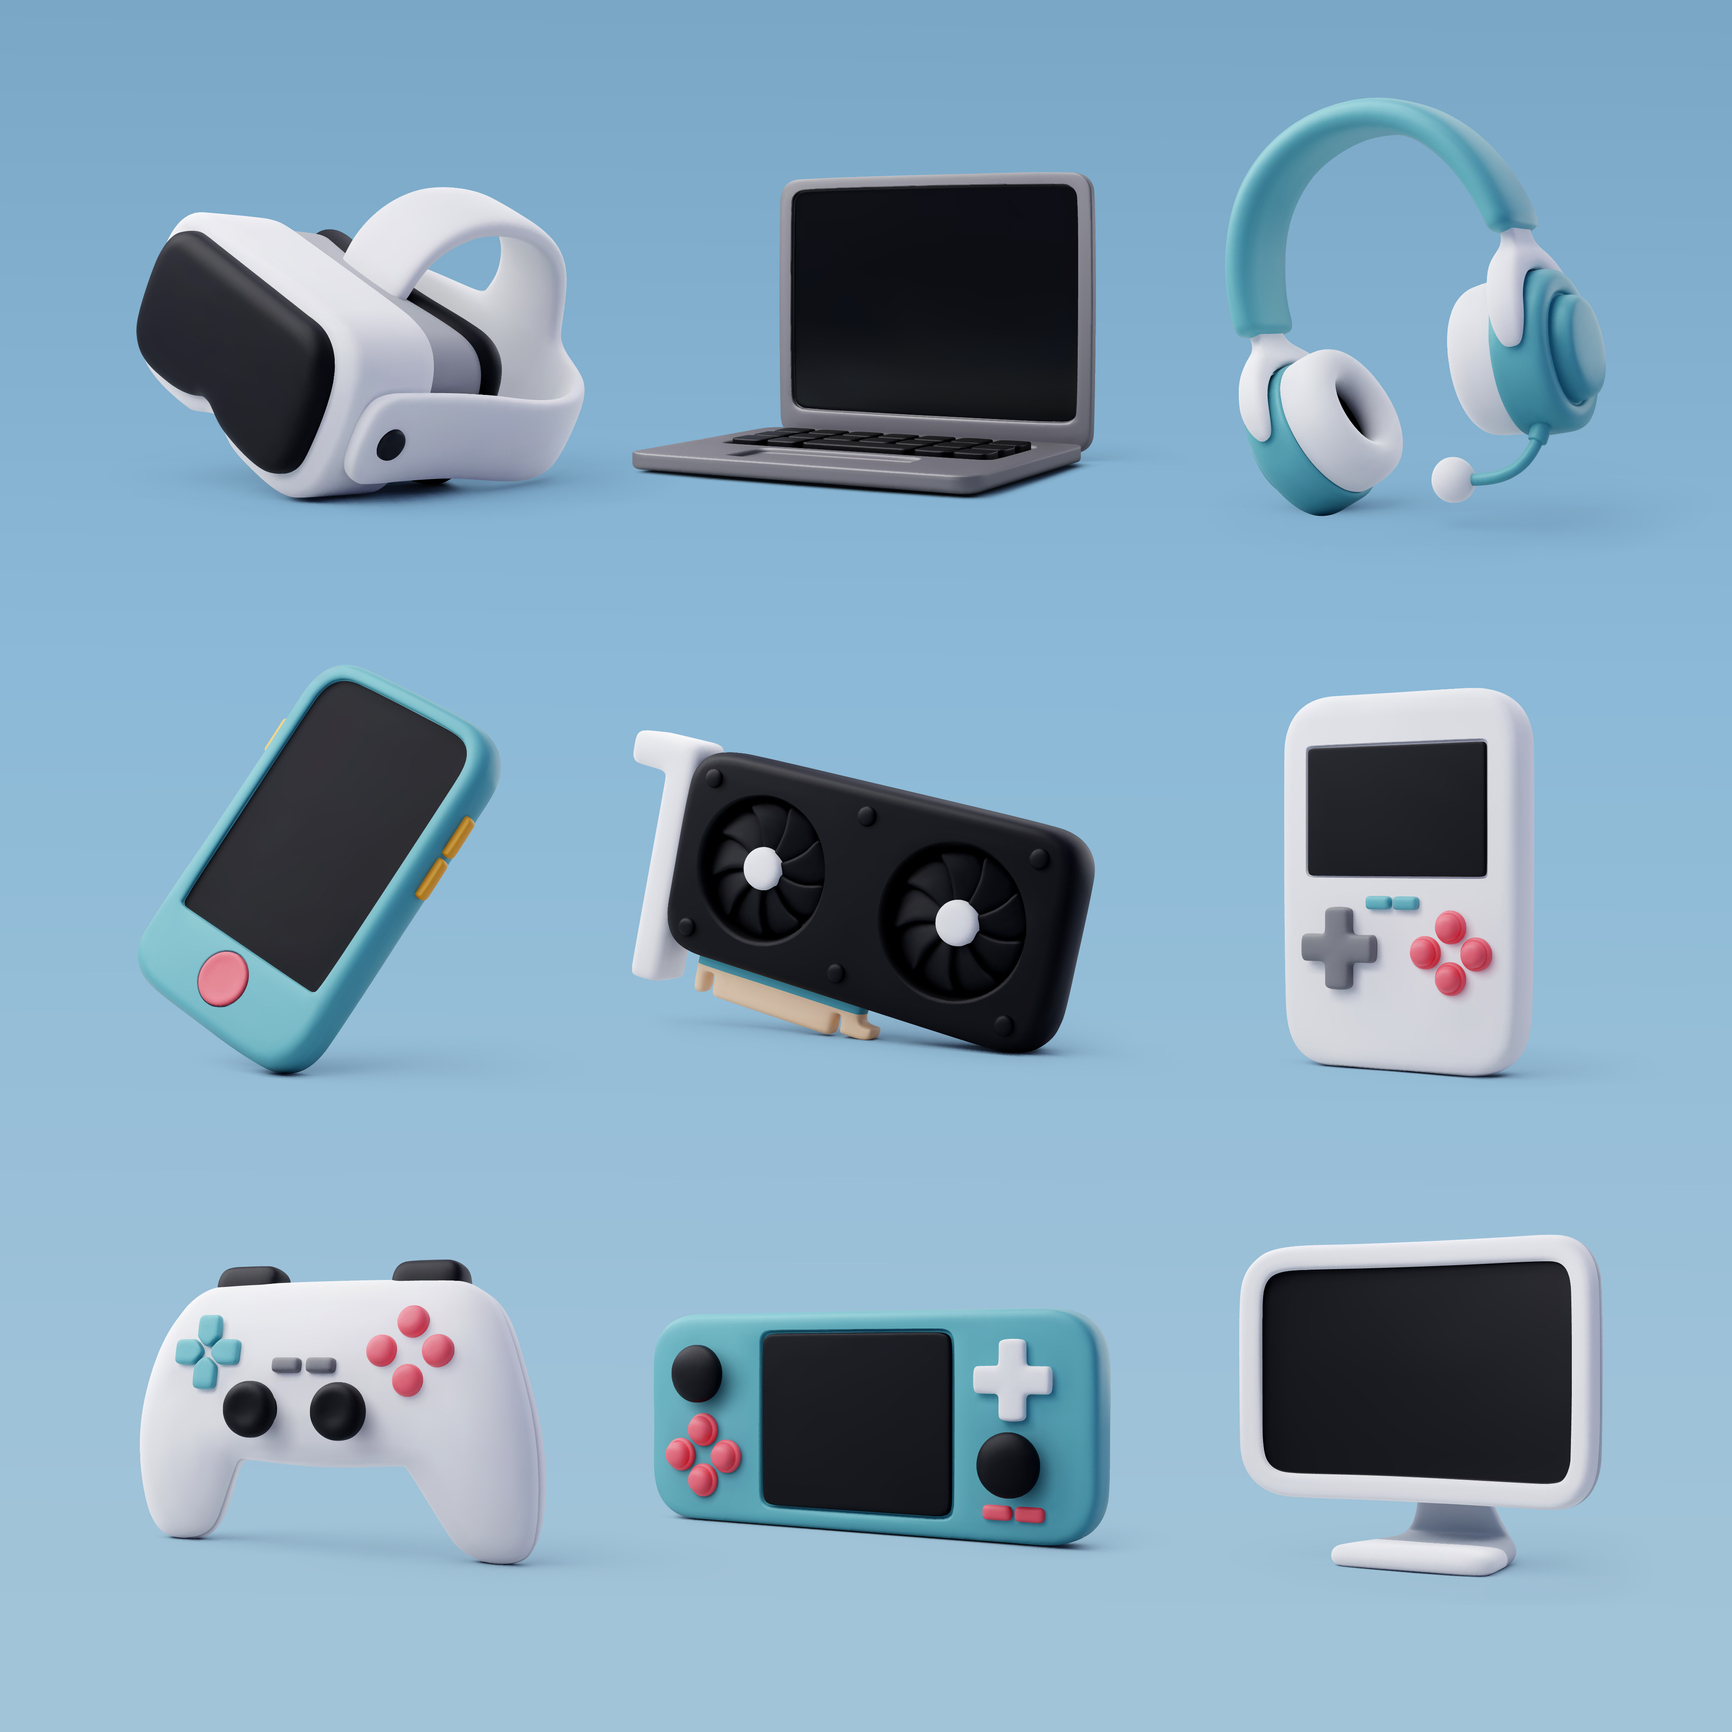 a variety of gaming implements including a controller, headphones, a laptop, and more